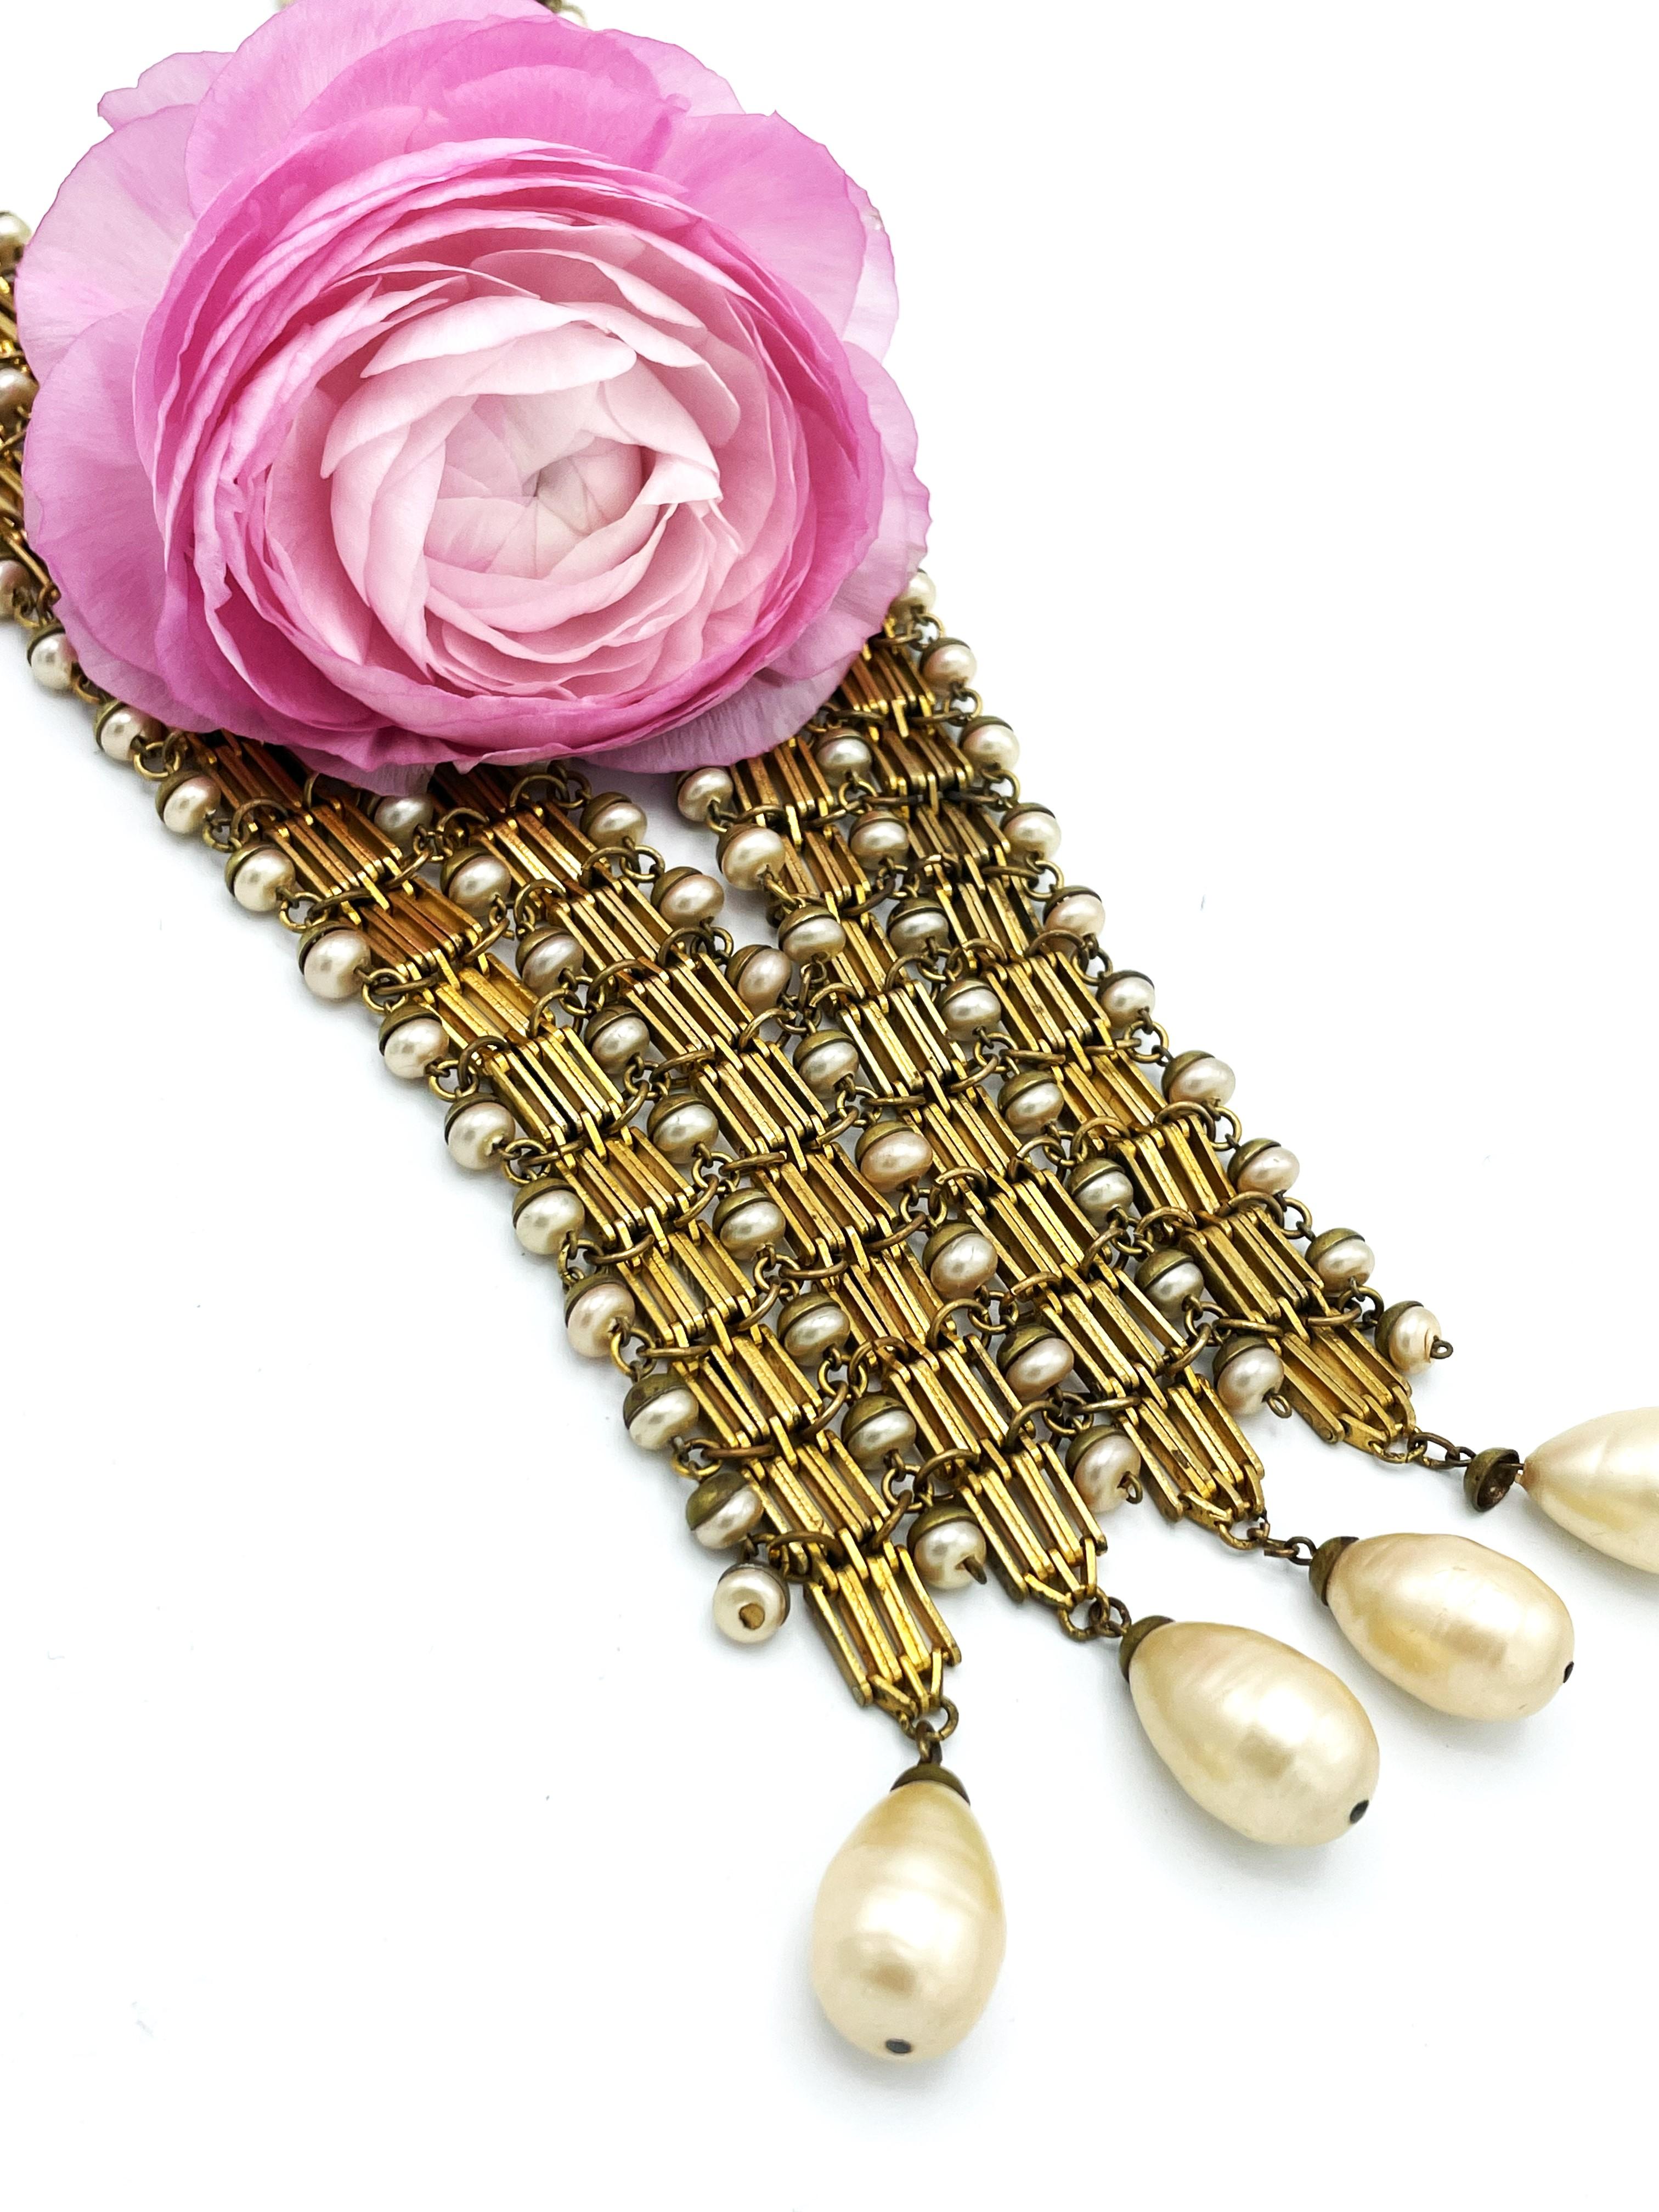 Women's  V-SHAPED NECKLACE, early 1940's, gold plated, handmade pearls, Made in France  For Sale